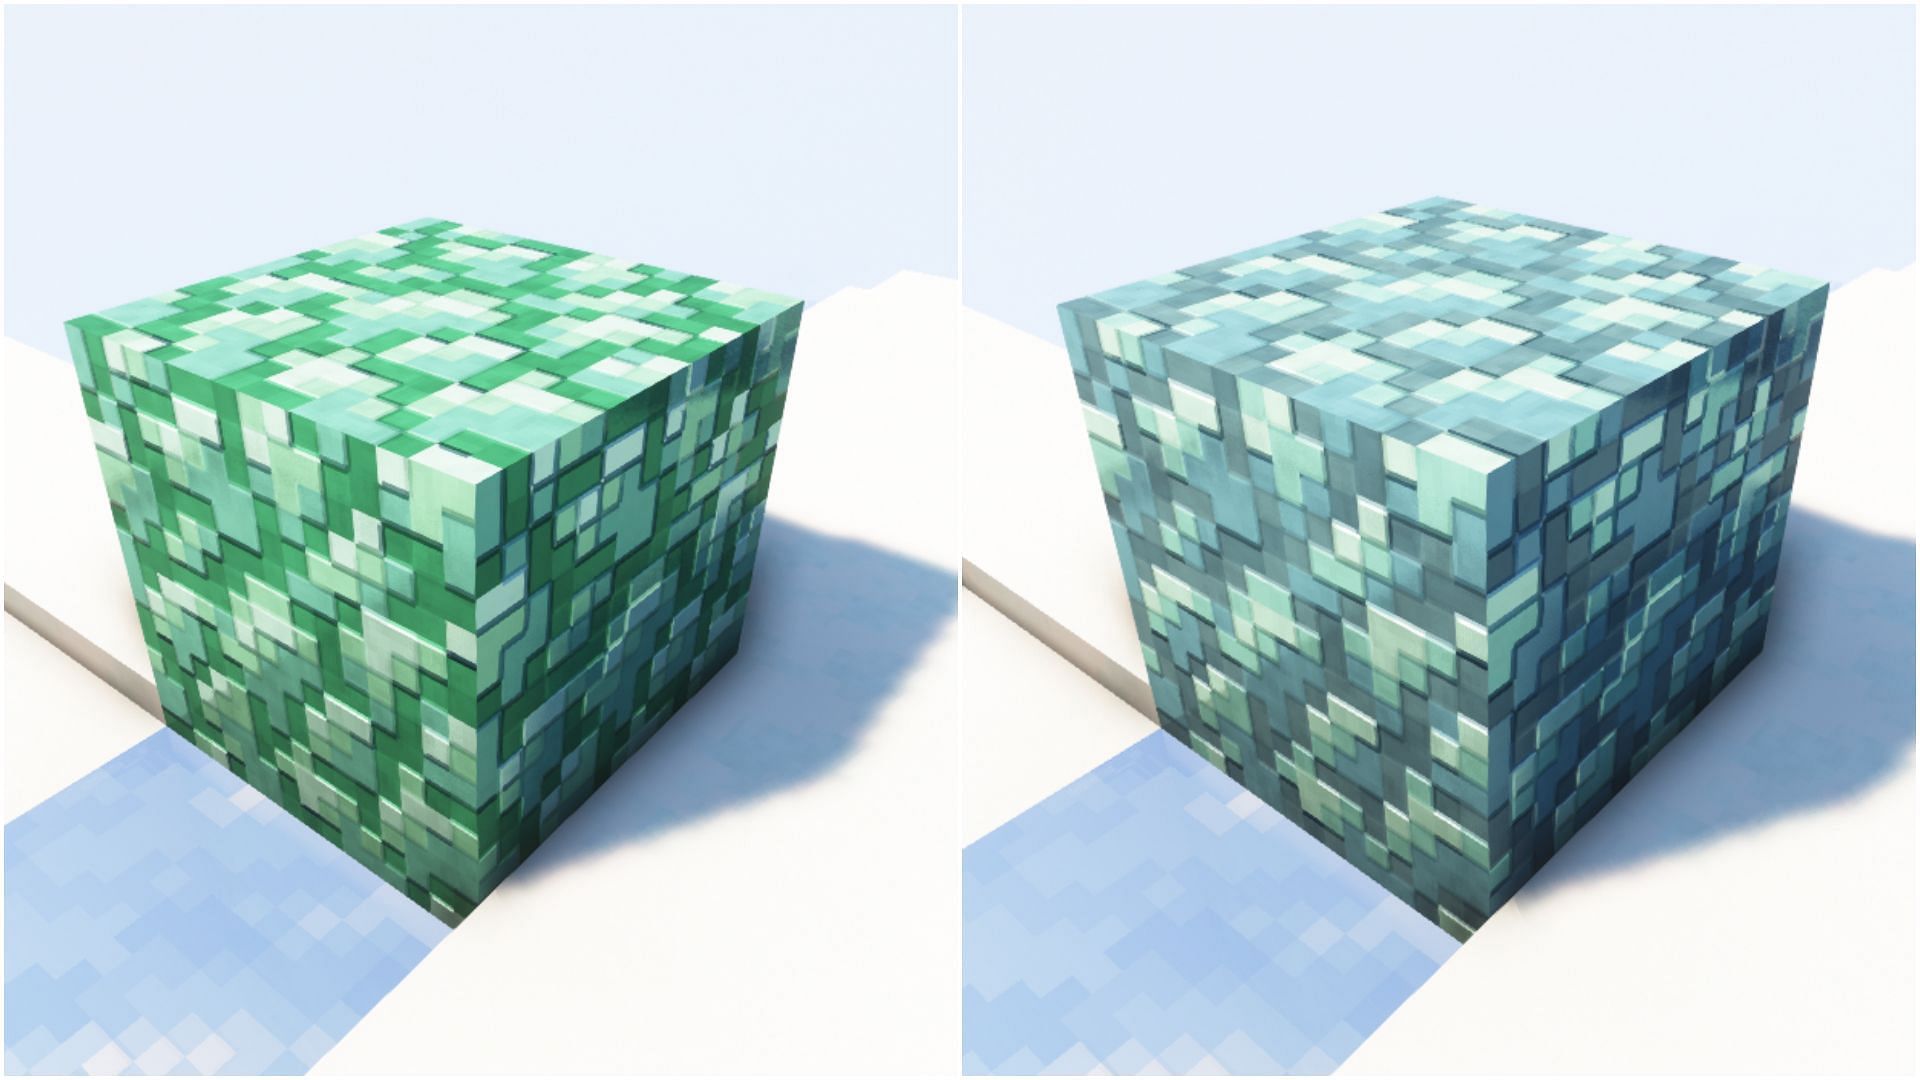 Prismarine blocks gradually change color from green to blue and back in Minecraft (Image via Mojang)